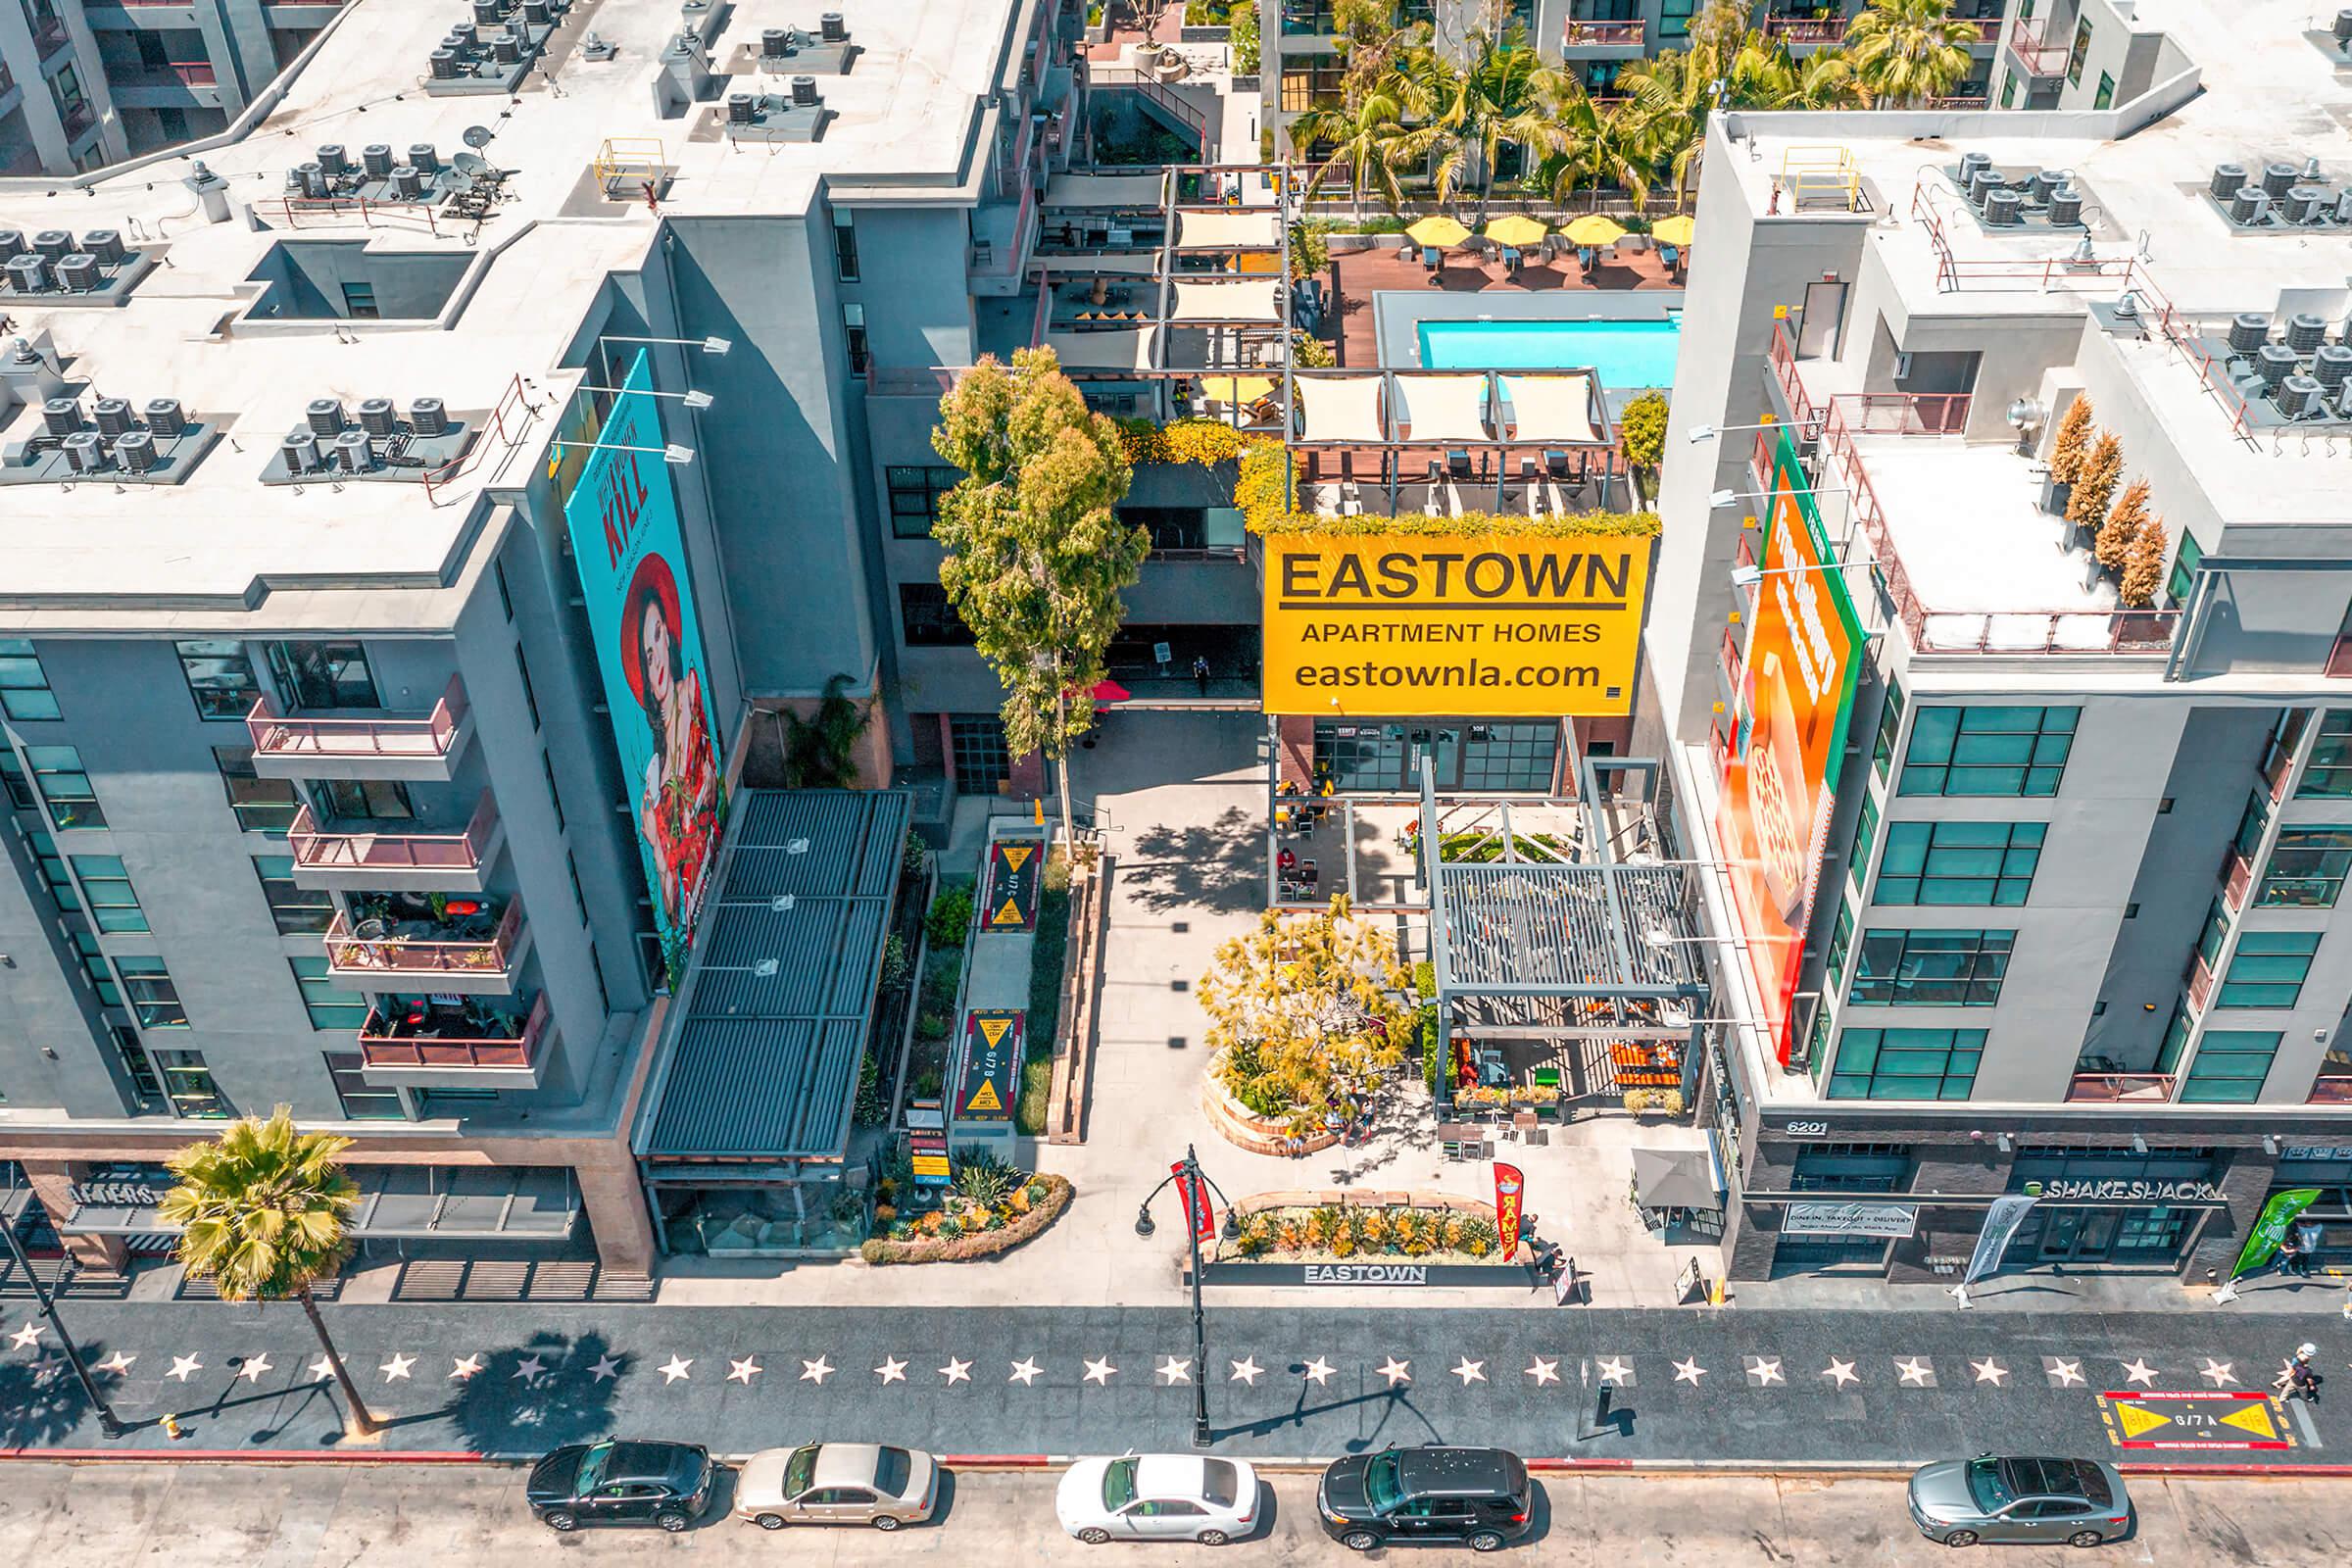 Eastown Apartments from above